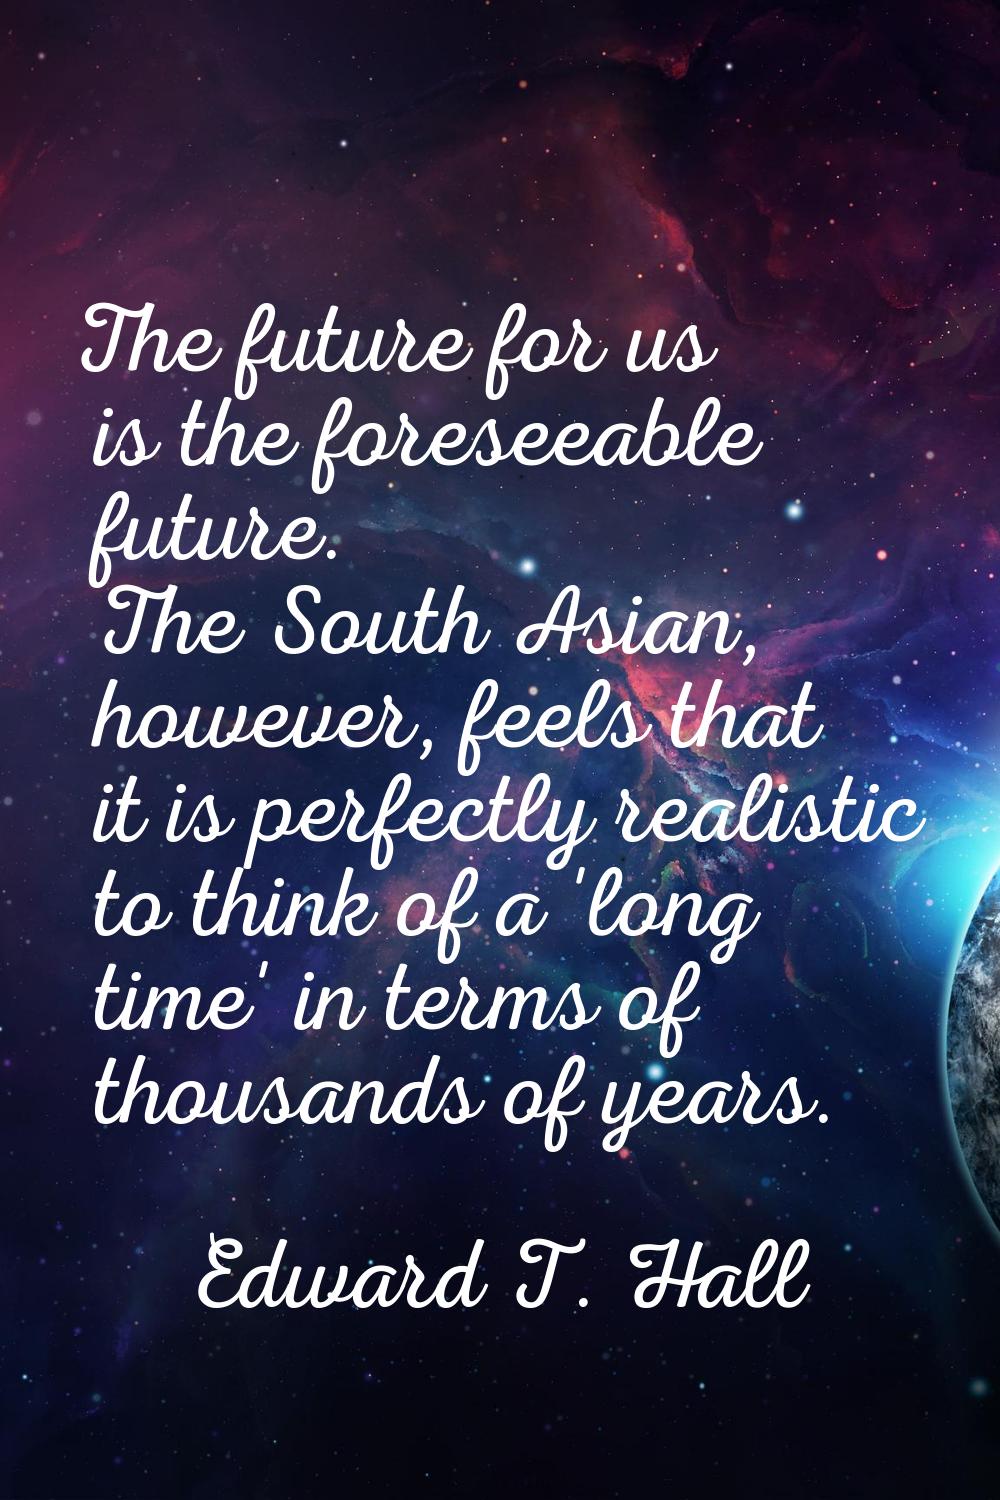 The future for us is the foreseeable future. The South Asian, however, feels that it is perfectly r